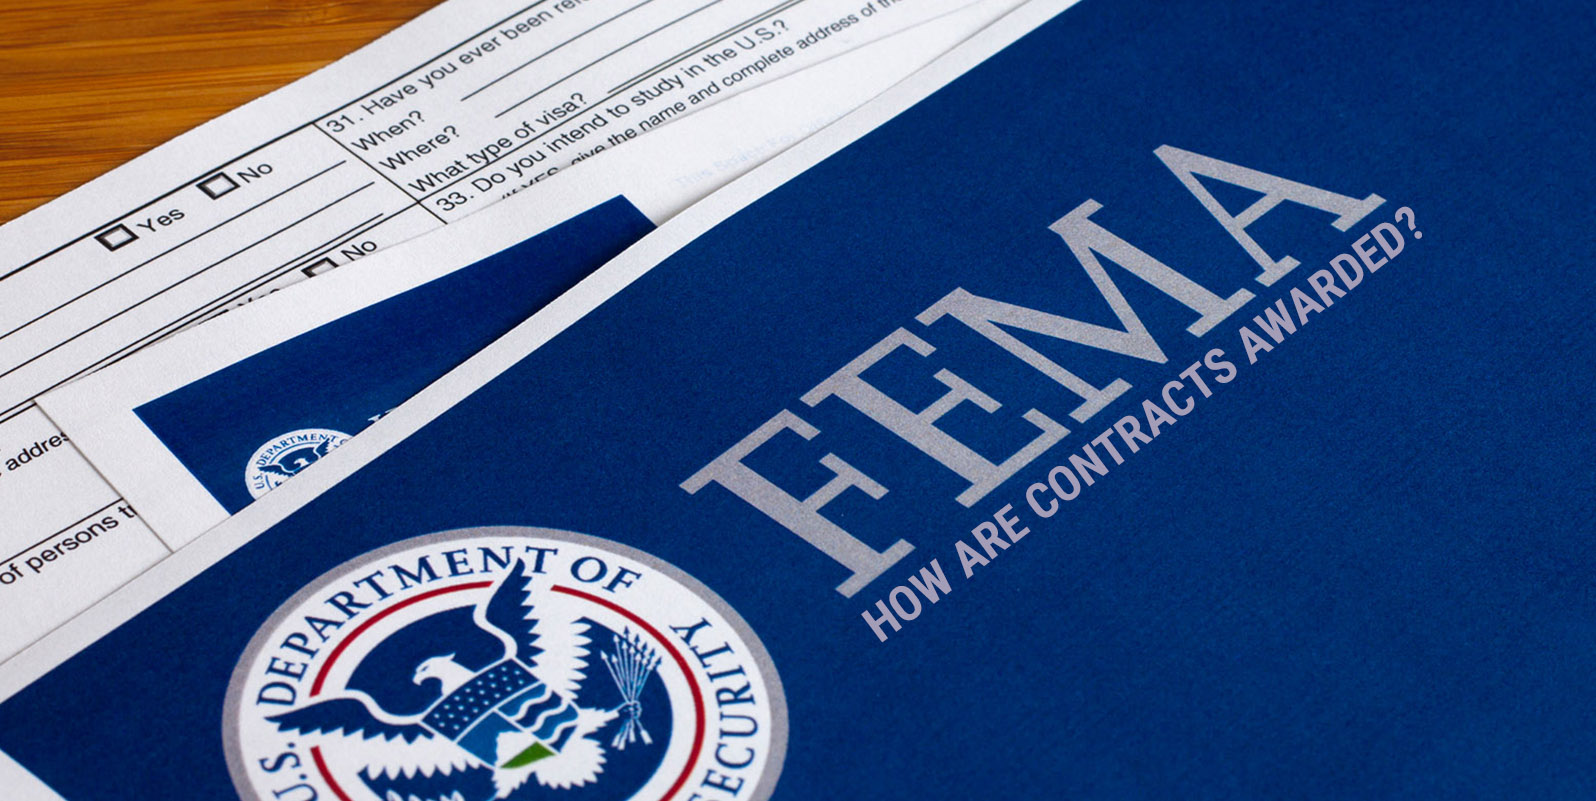 How Does FEMA Award Contracts? Access